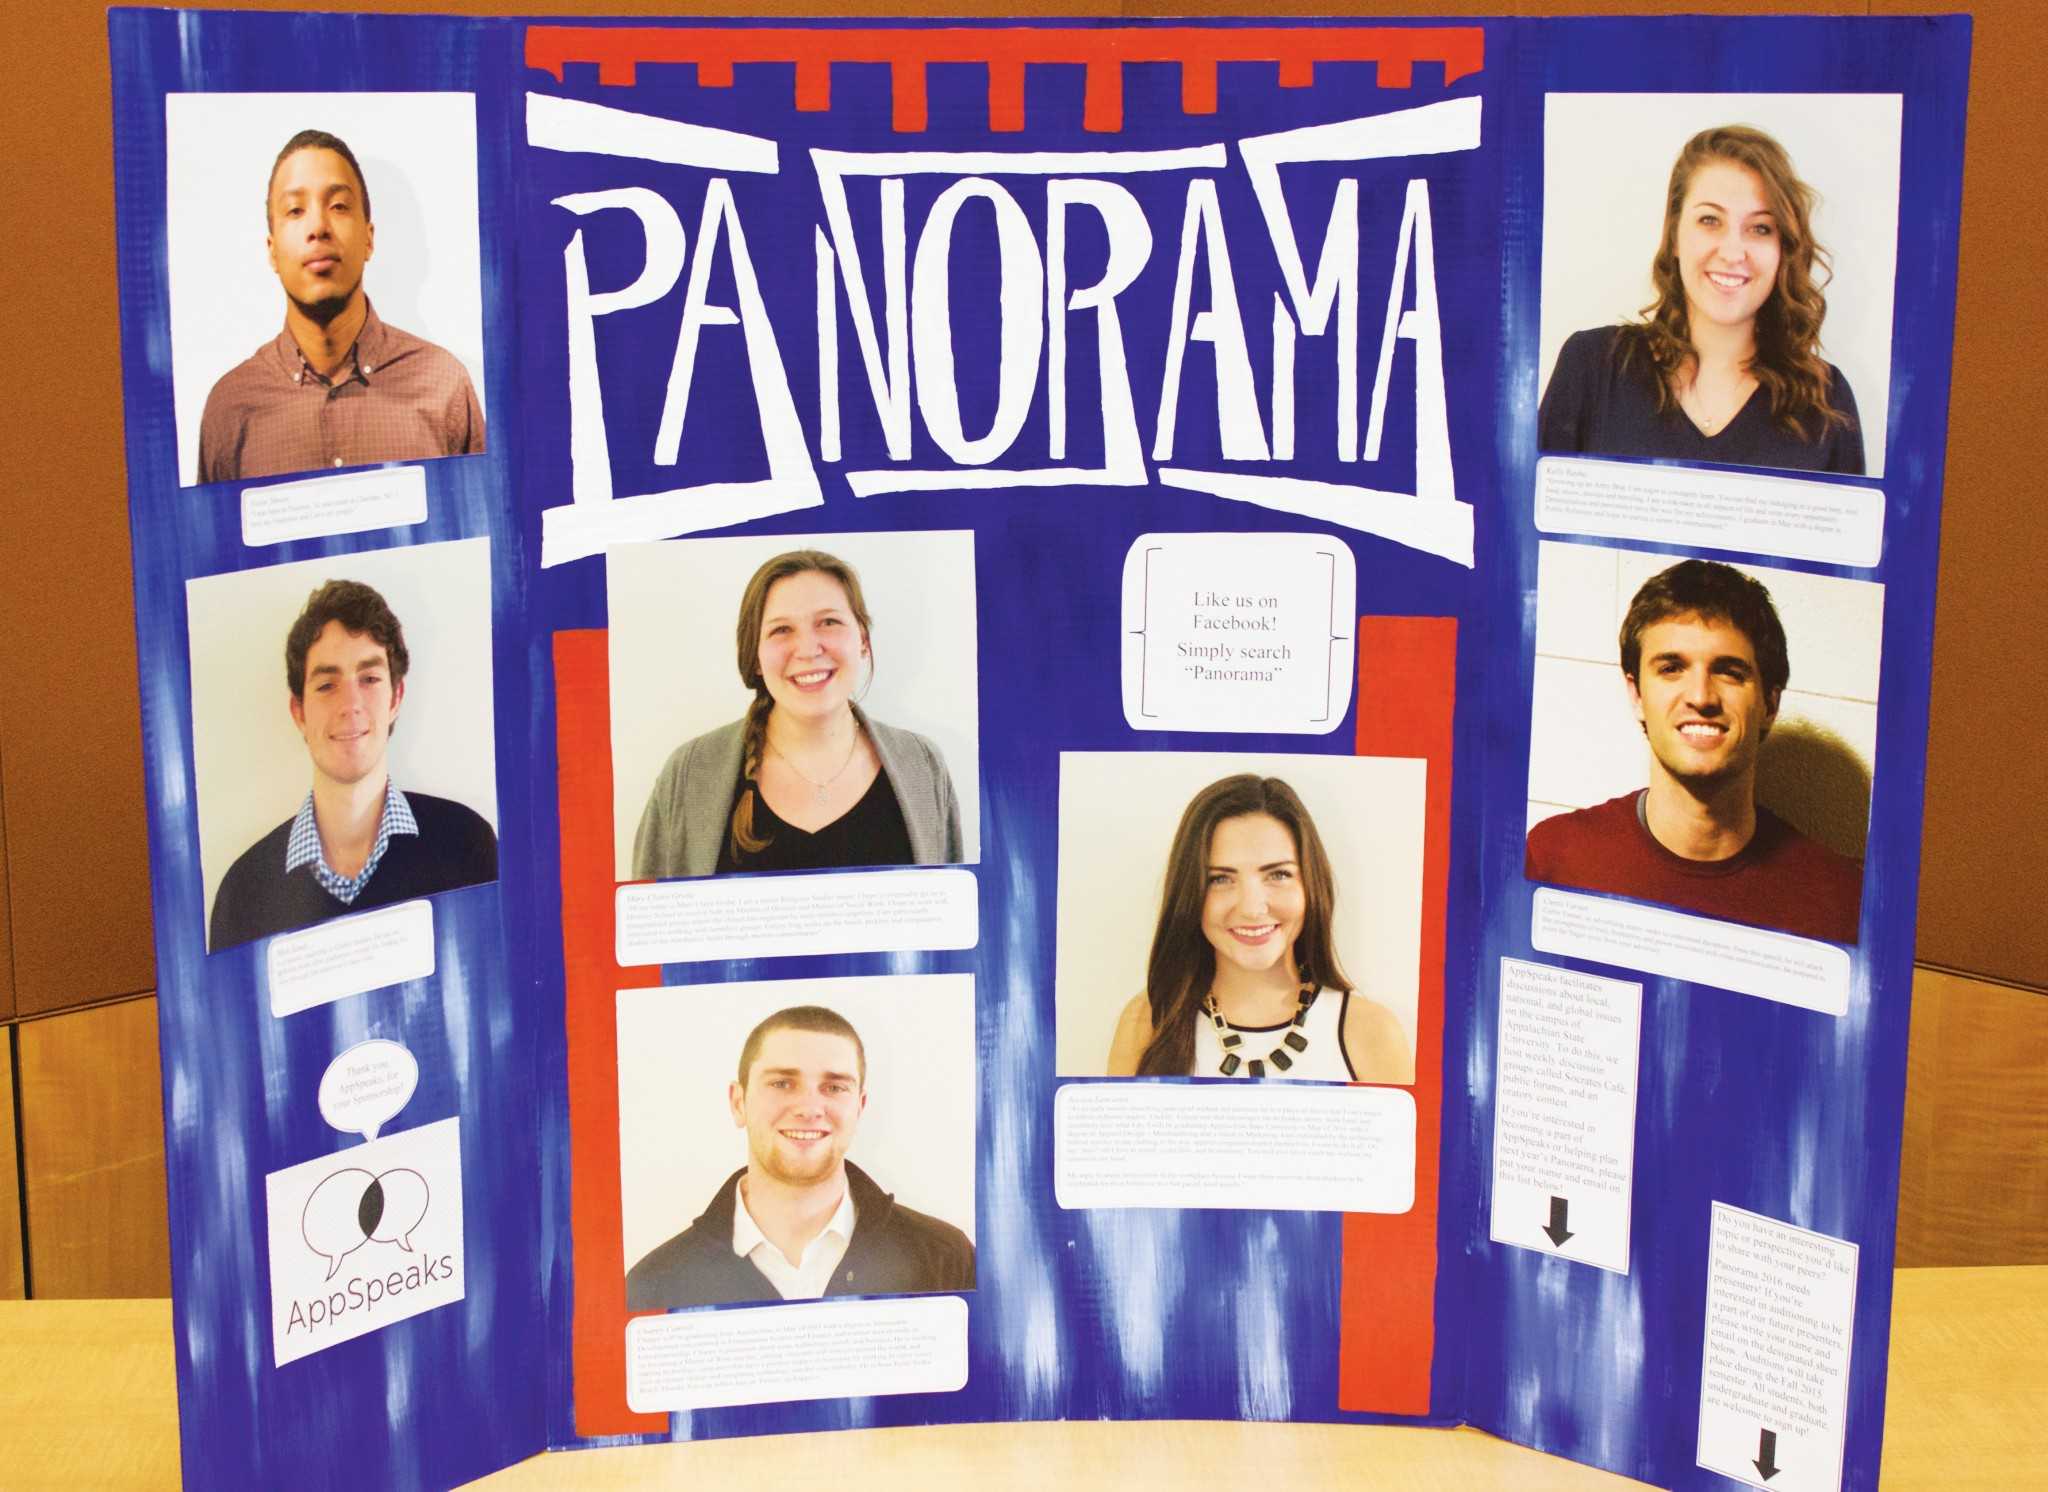 At Panaorama, seven students gave talks on various topics that they were passionate about. A poster boardin the Blue Ridge Ballroom showcased the speakers and provided information about their topics.